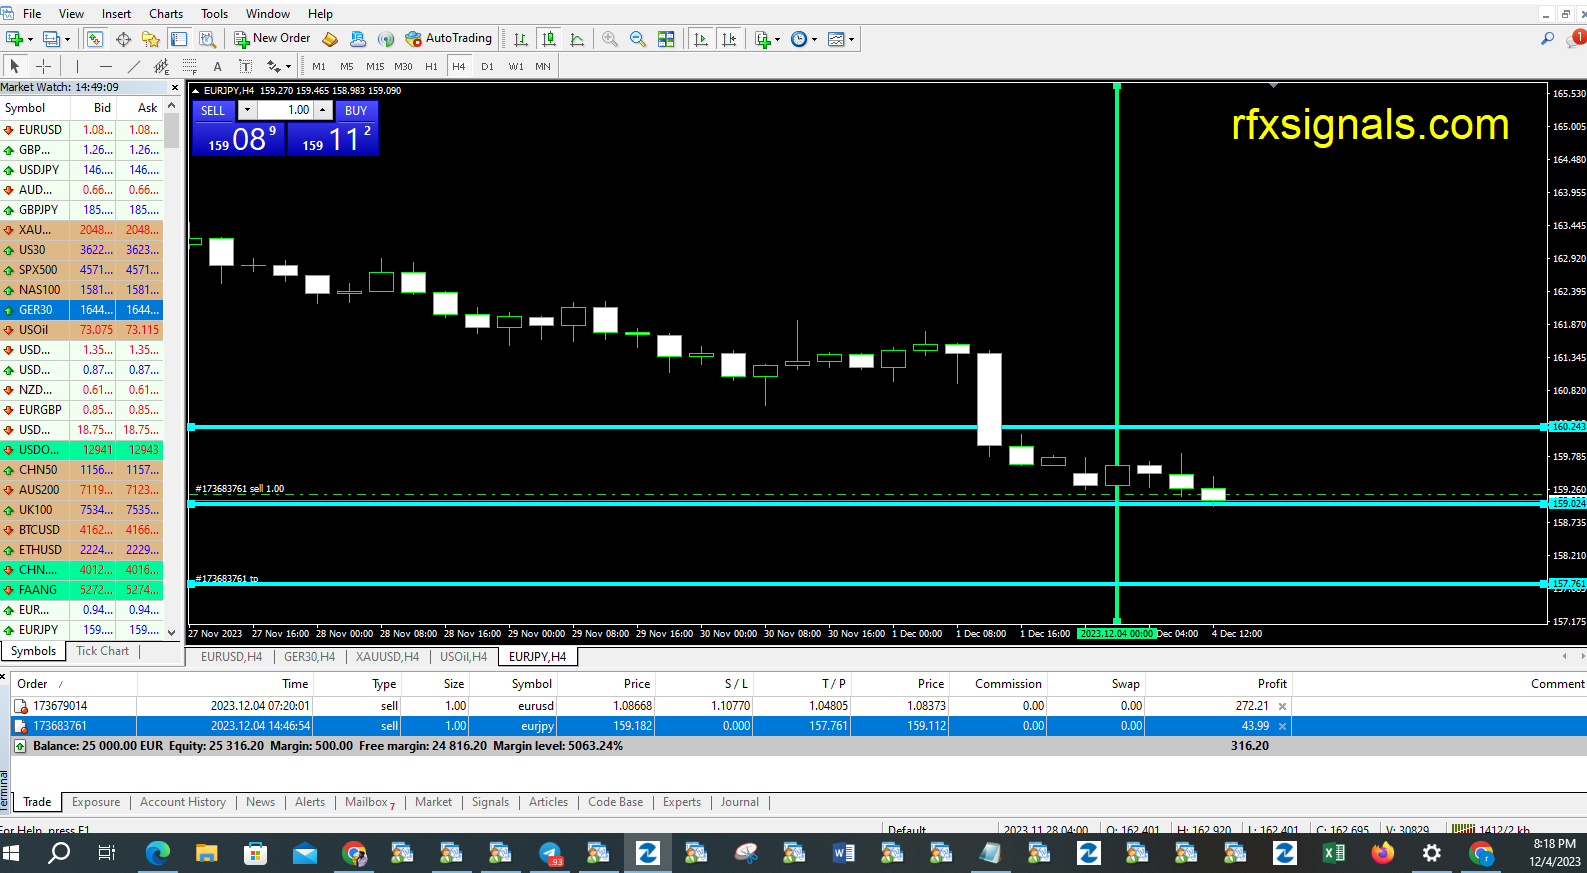 EURJPY SELL 04 12 23